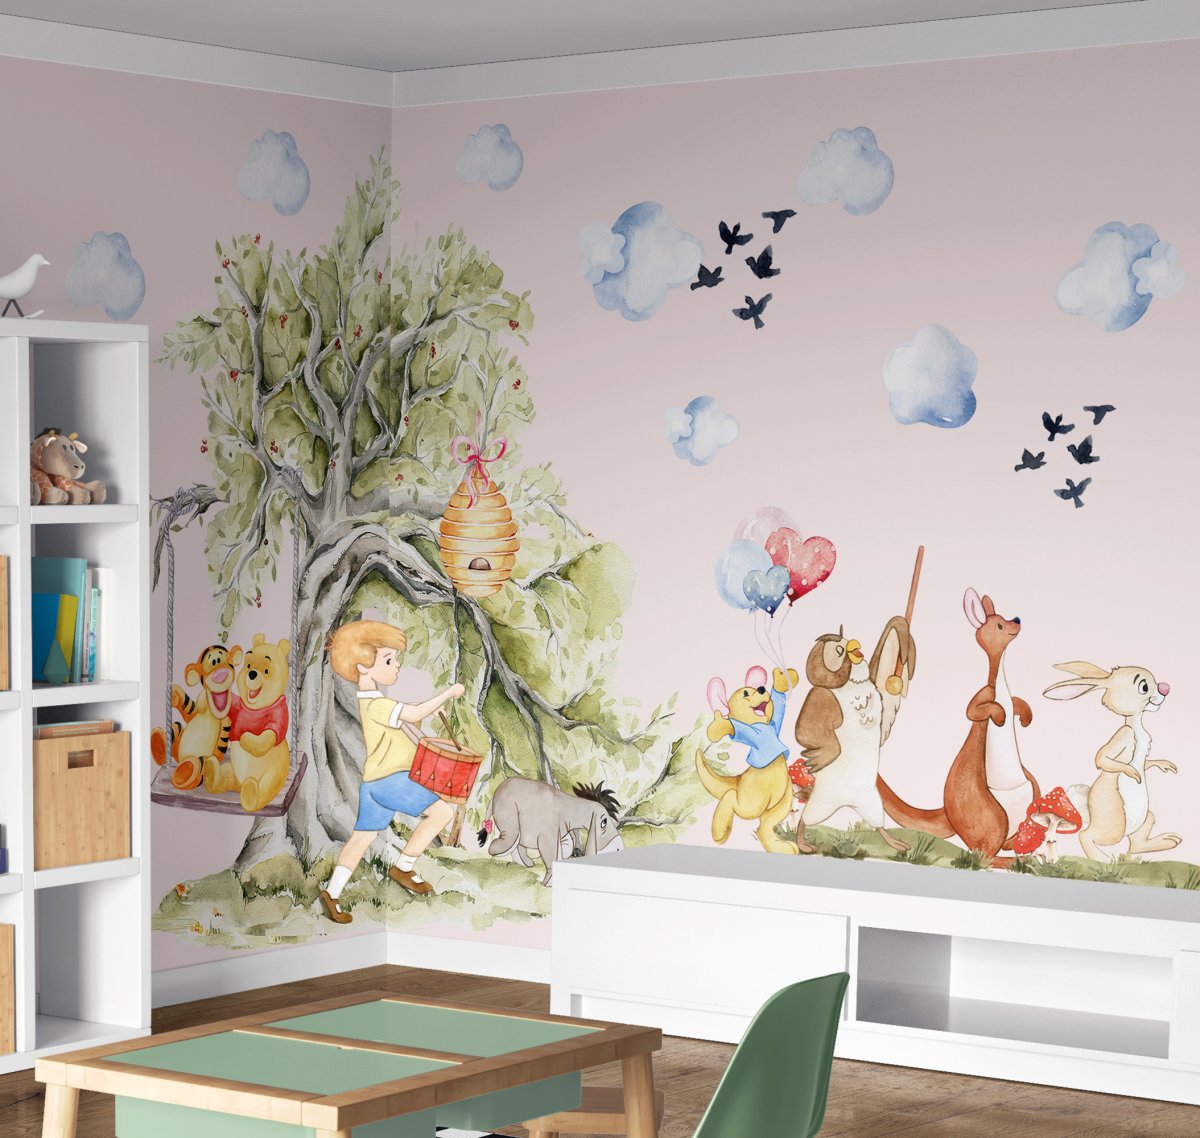 Giant Winnie the Pooh Wall Decal for kids, Winnie the Pooh for Nursery